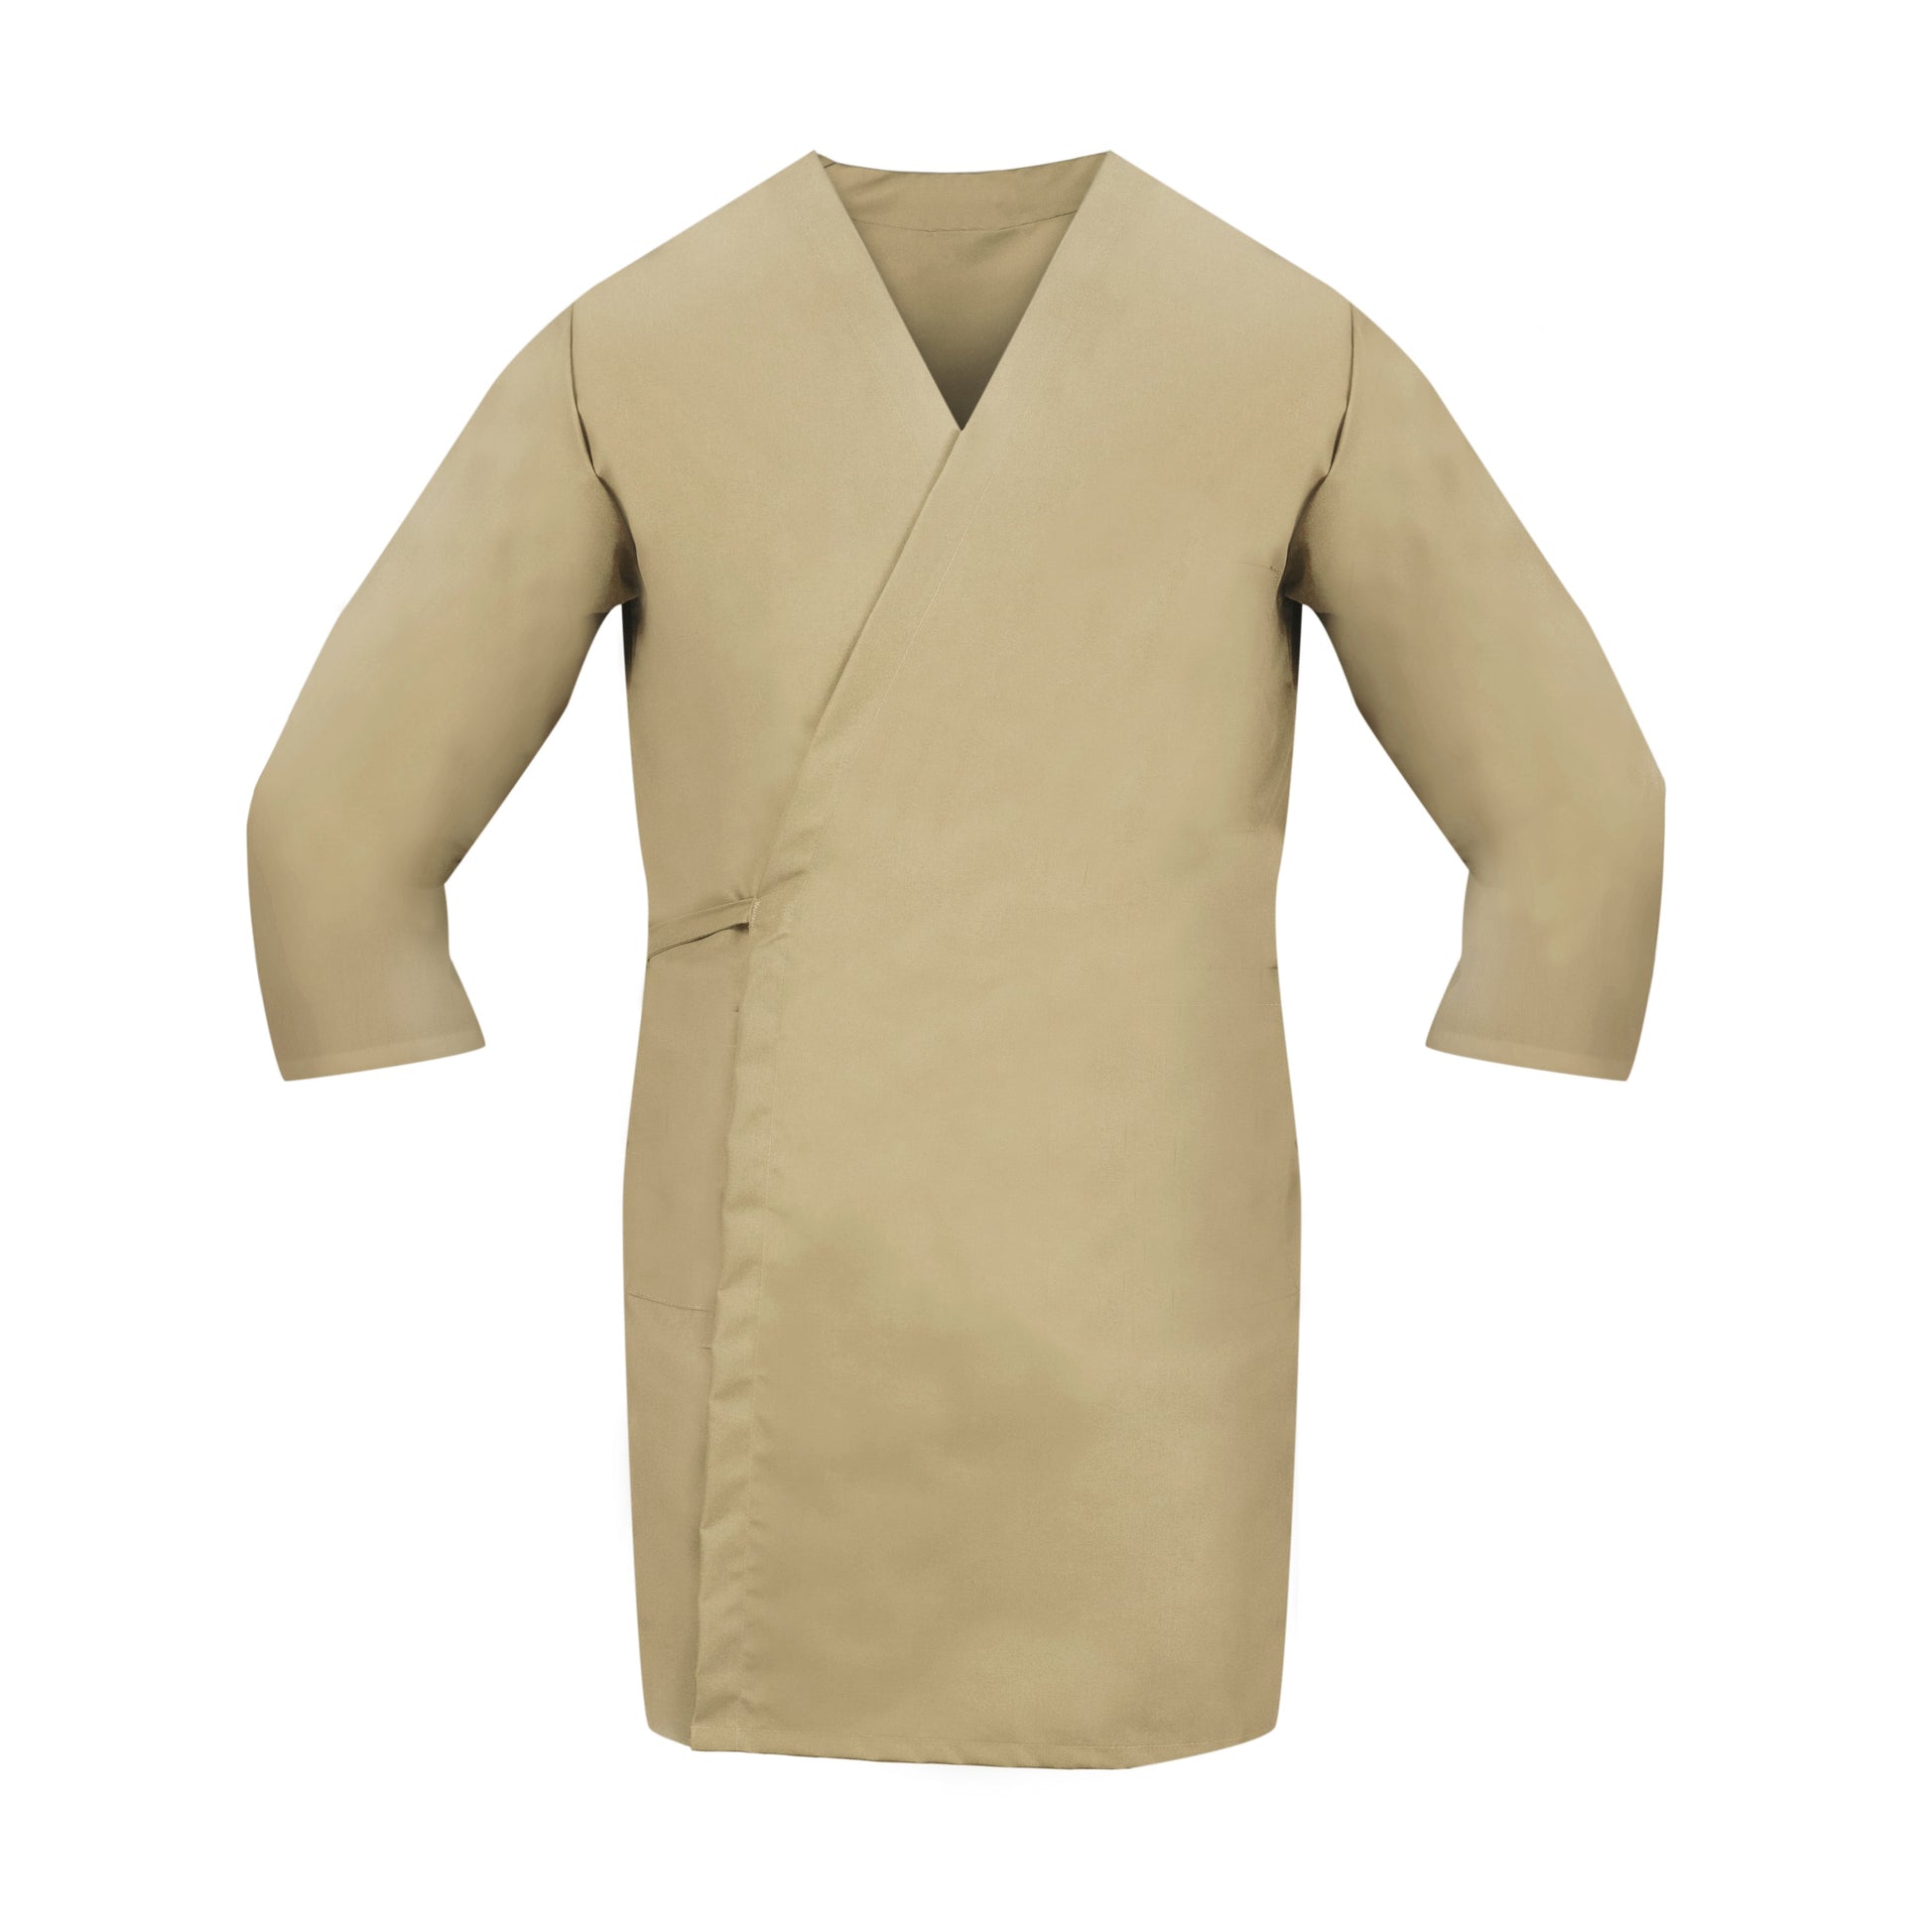 American Dawn | X-Large Tan Smock Wraps With 3/4 Sleeves And No Pockets